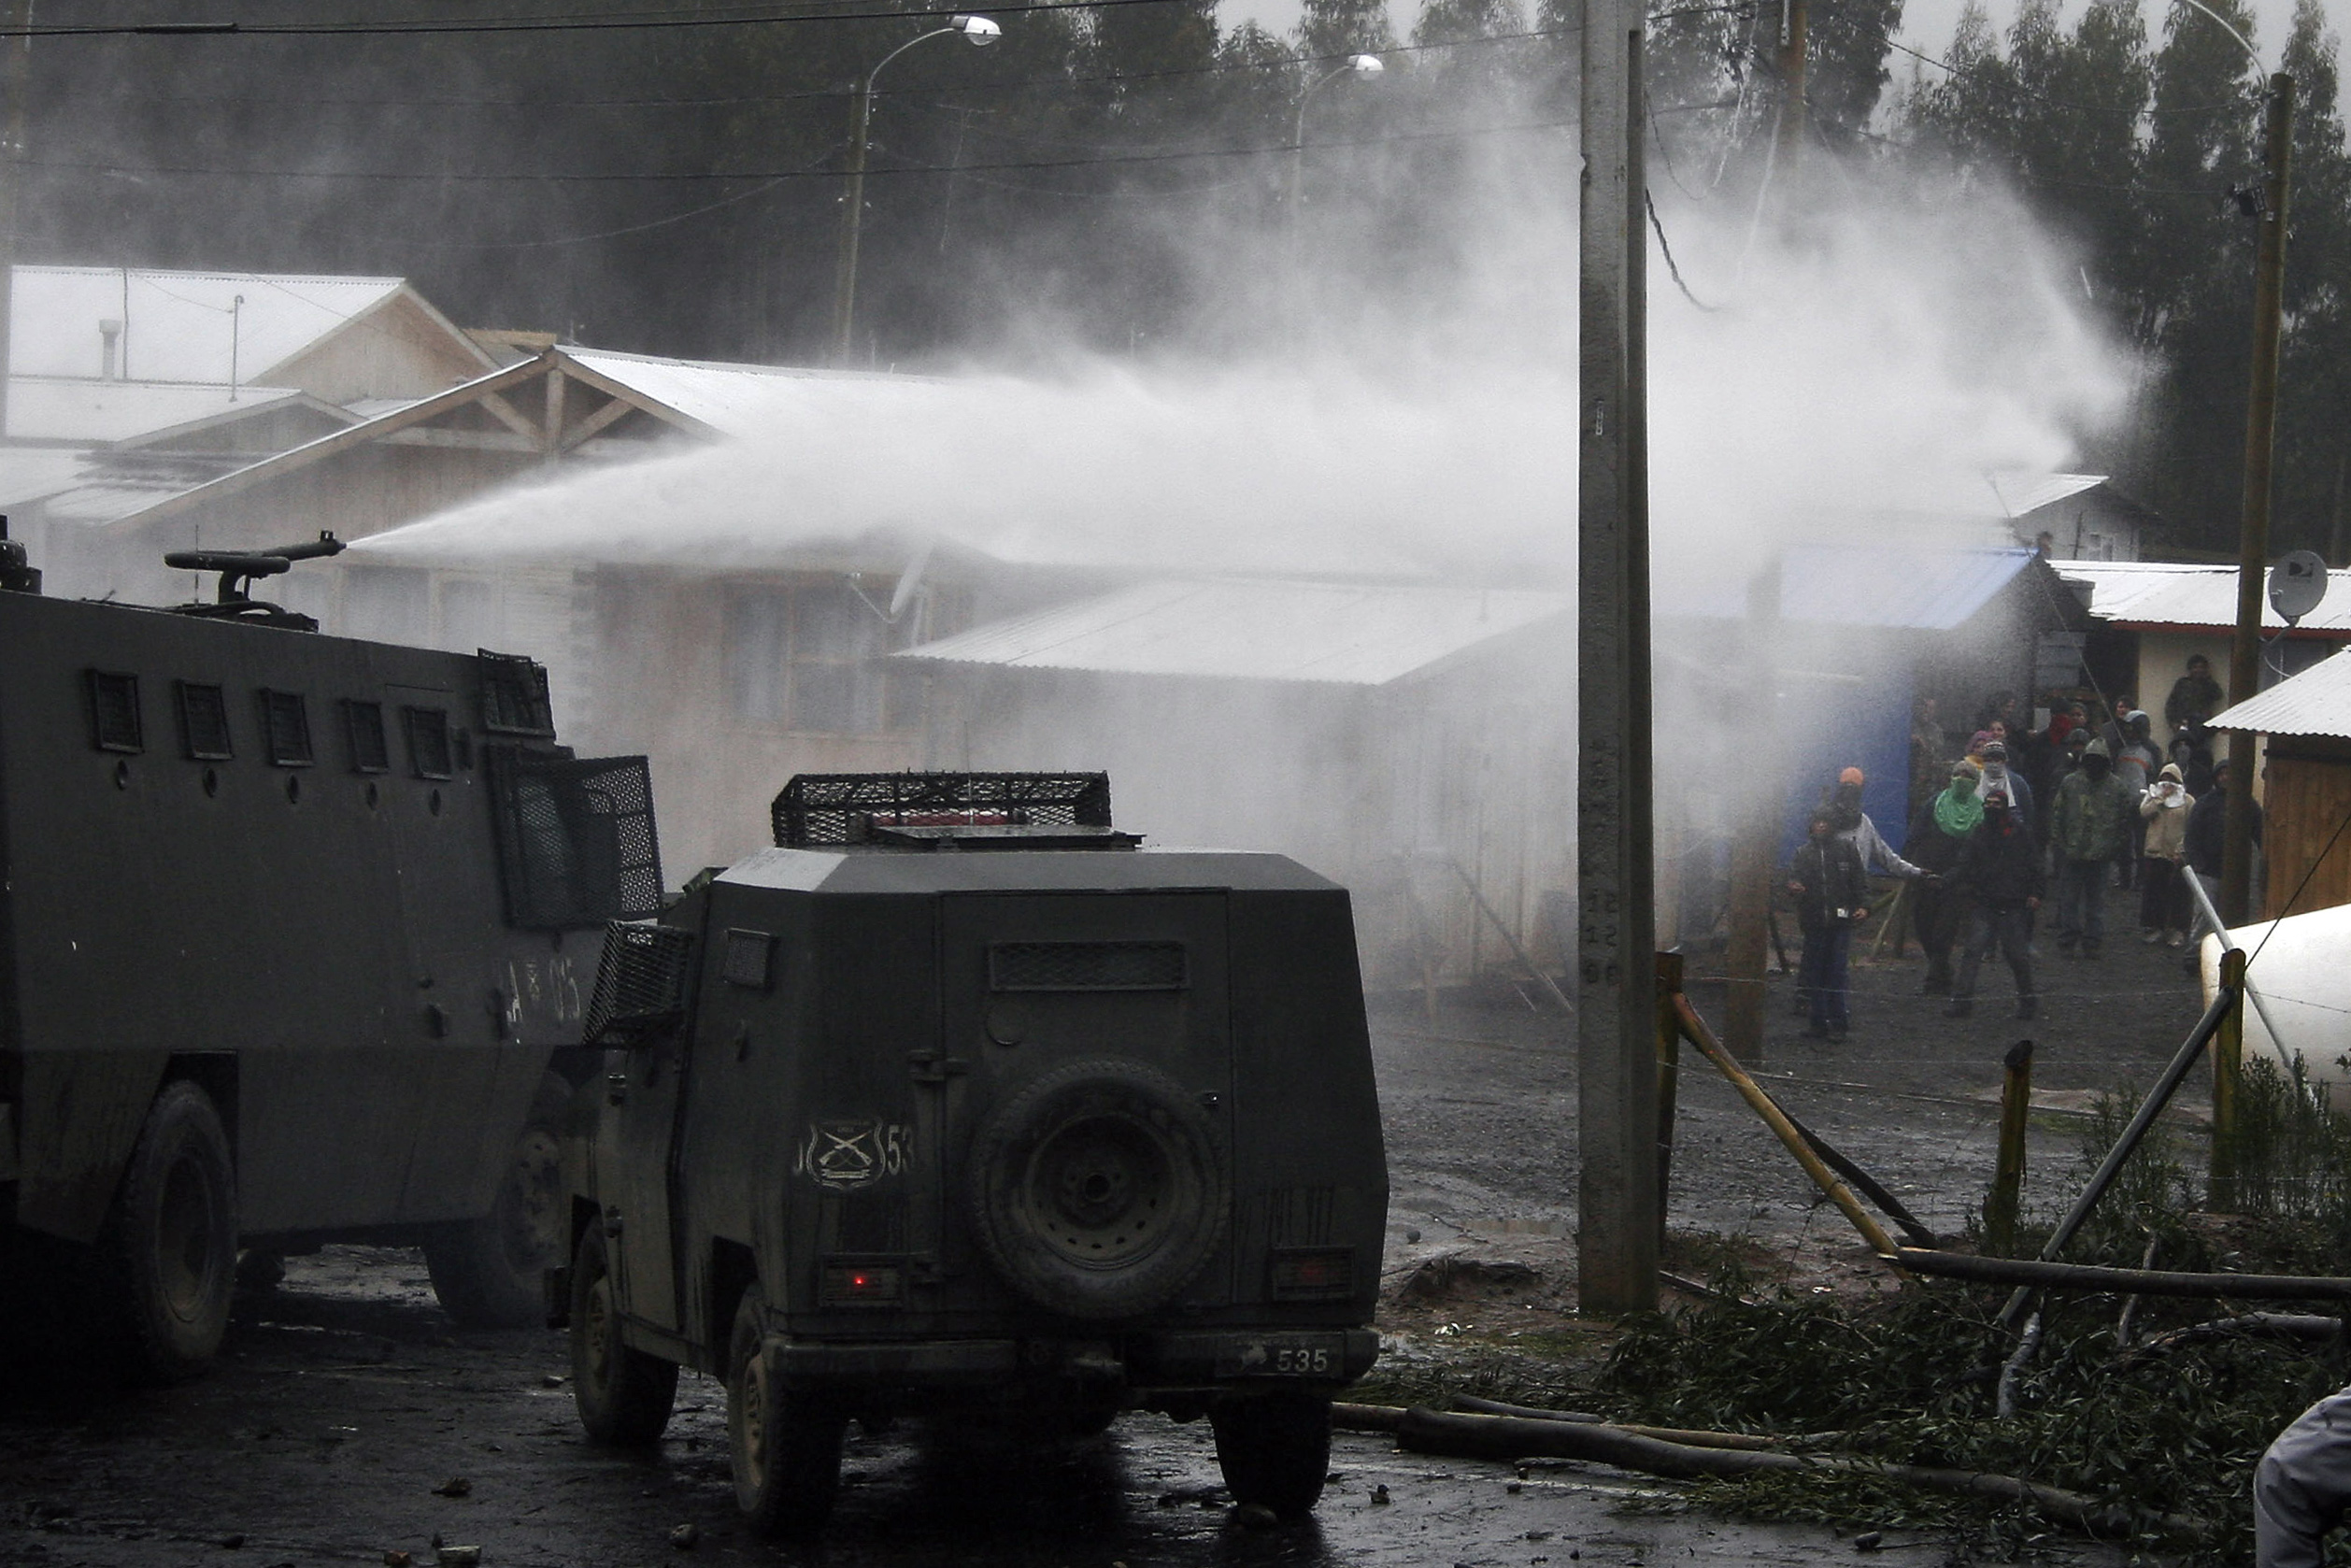 Residents are dispersed as the Police uses a water cannon during a protest in Dichato, a coastal town about 500 kms south of Santiago, Chile, Thursday, July 21, 2011. Photo: AP